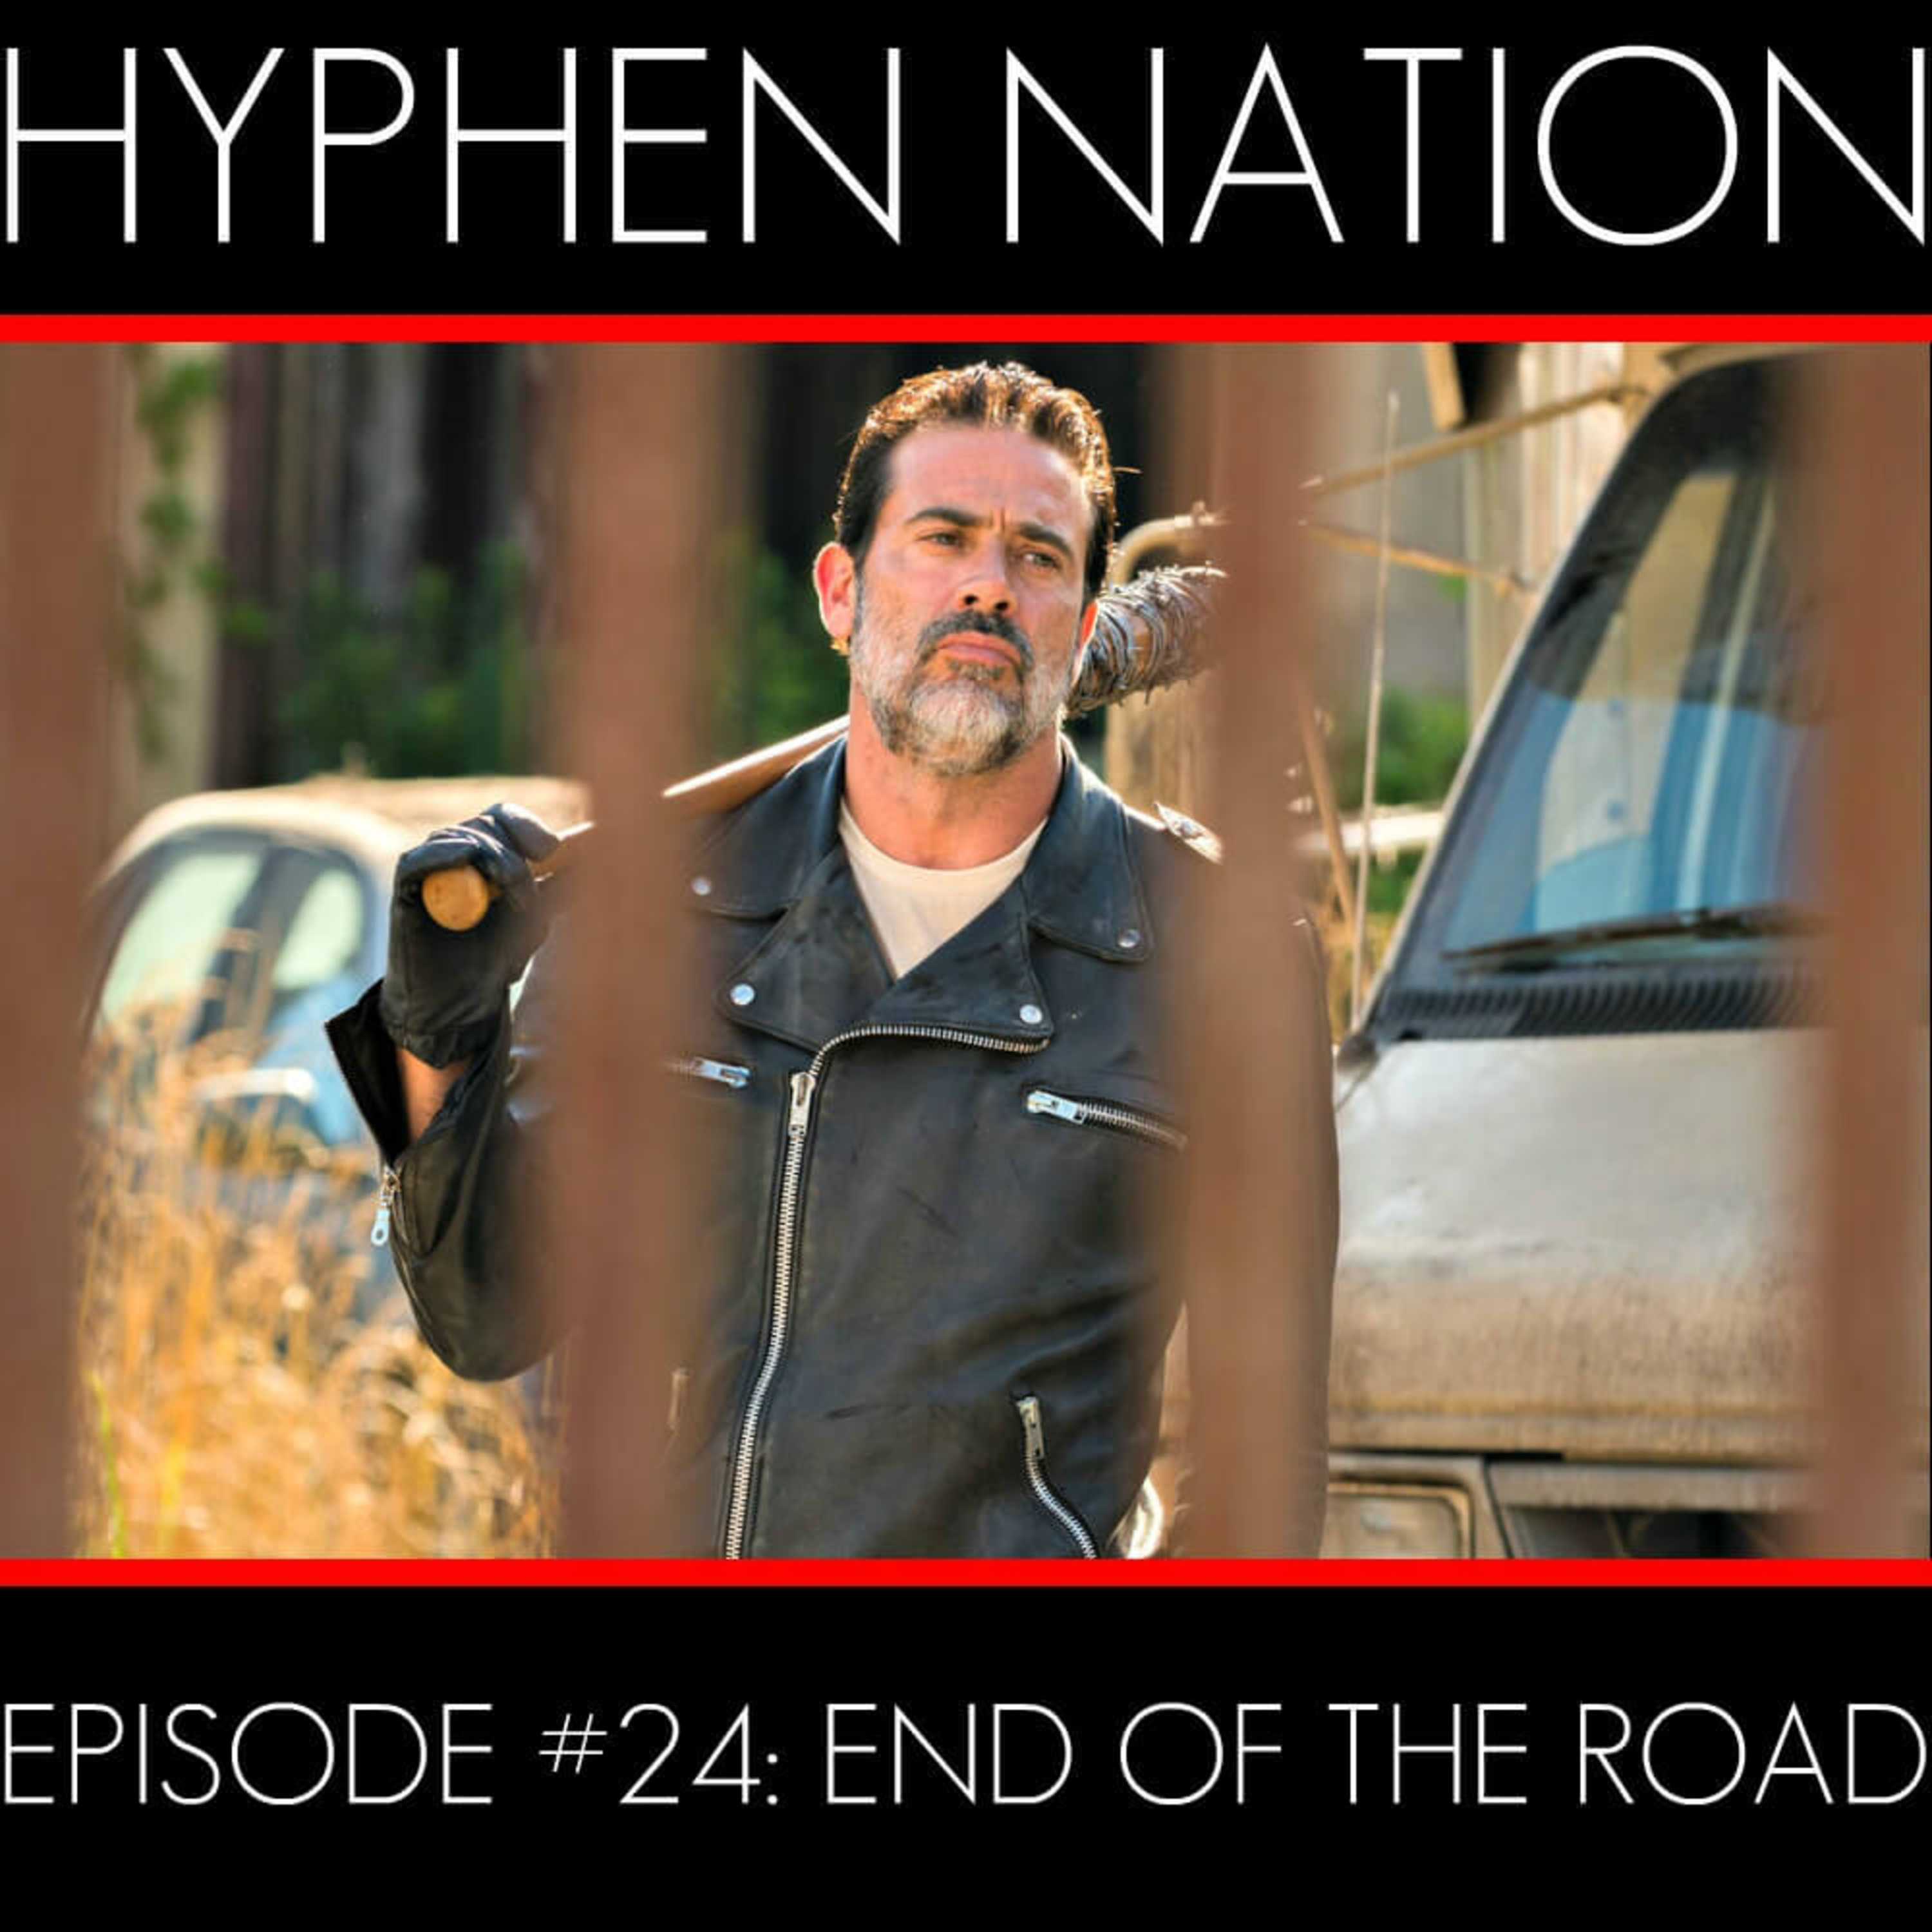 Episode #24: End Of The Road